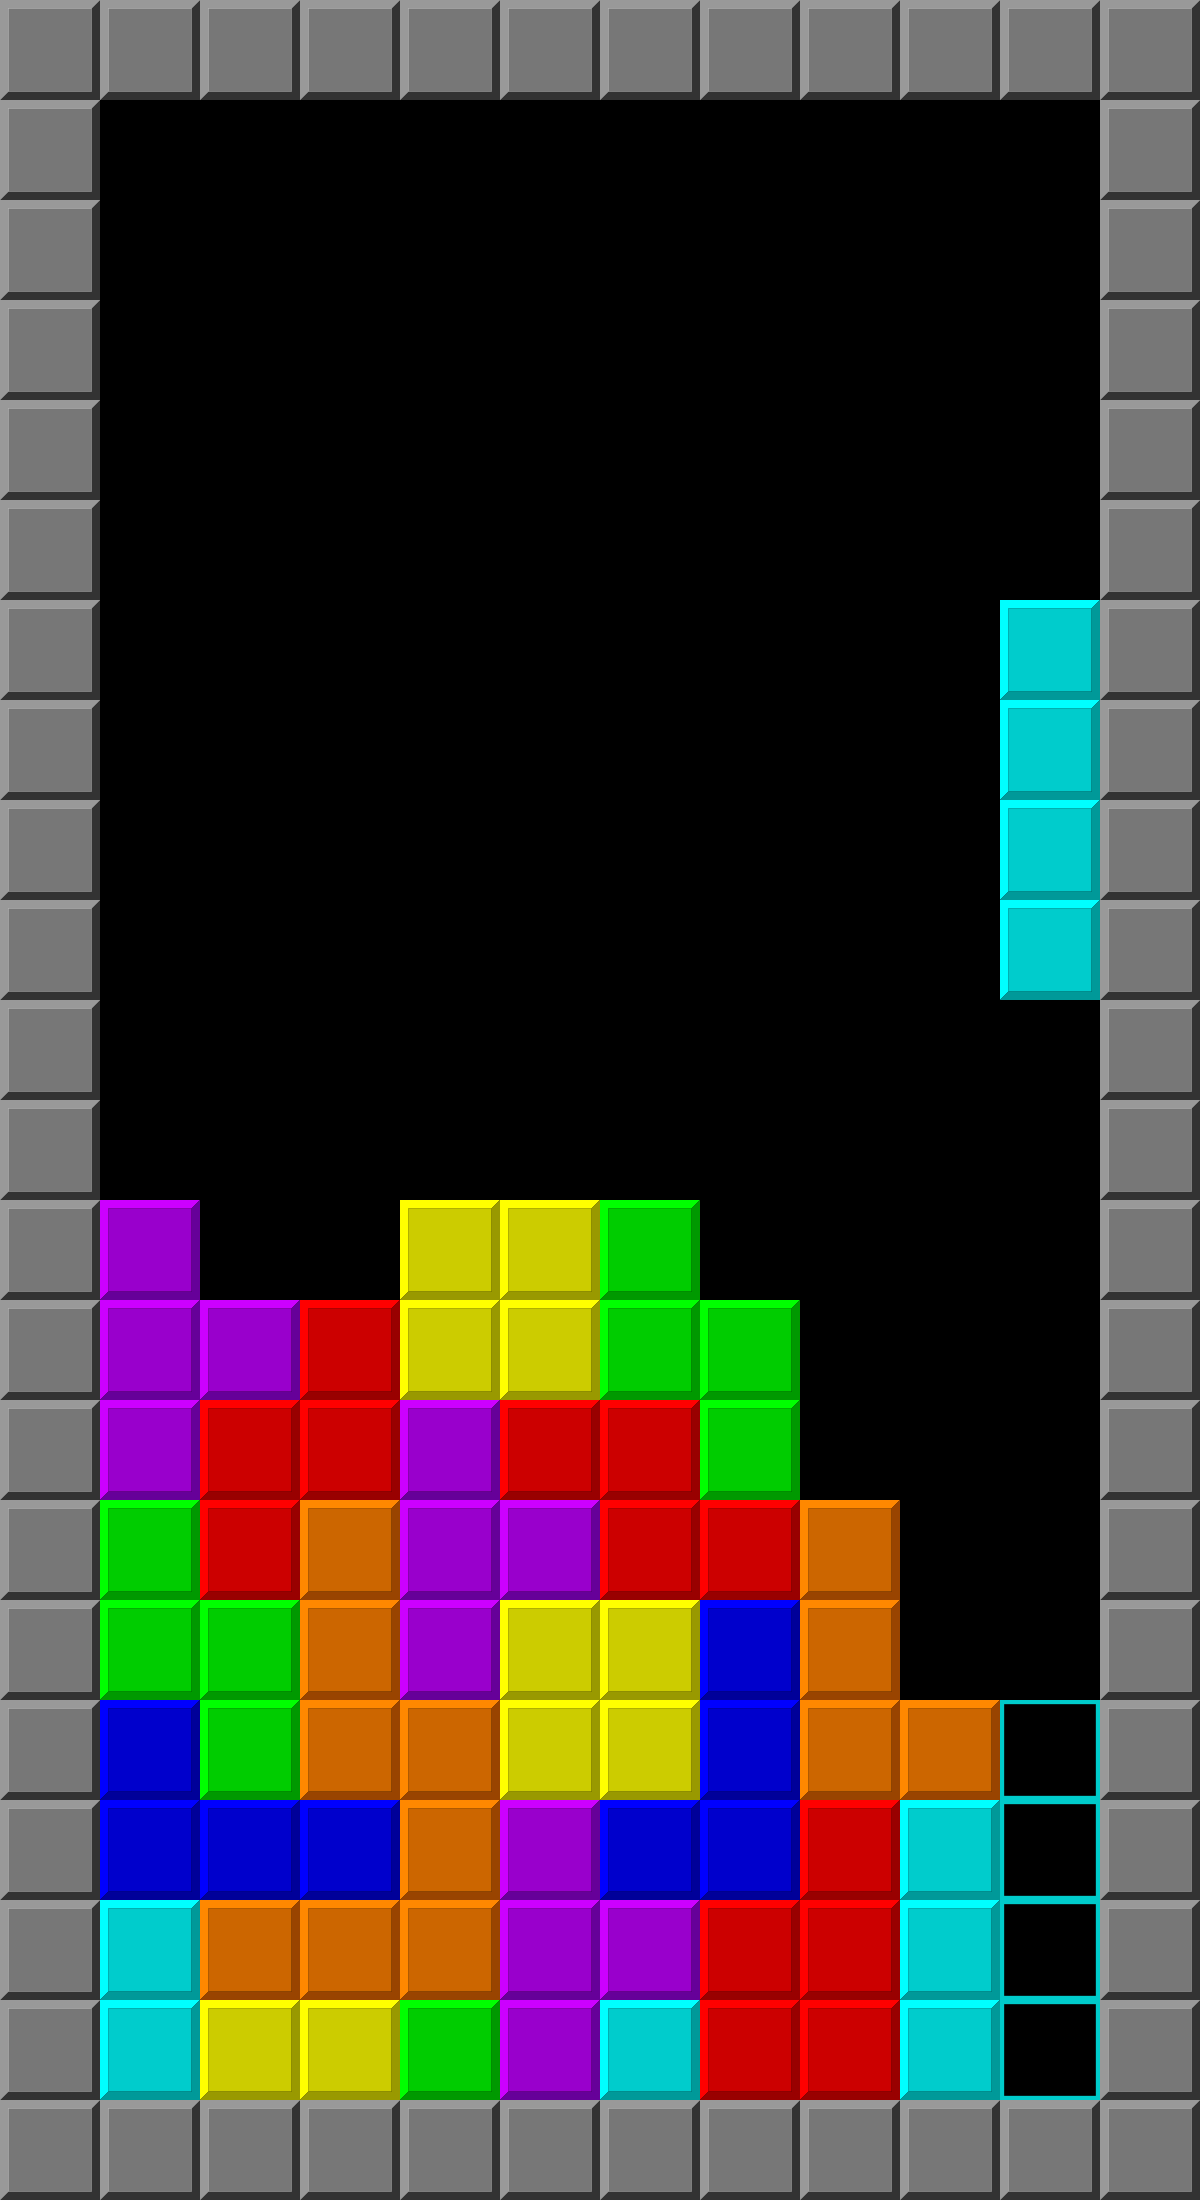 Typical_Tetris_Game.svg.png